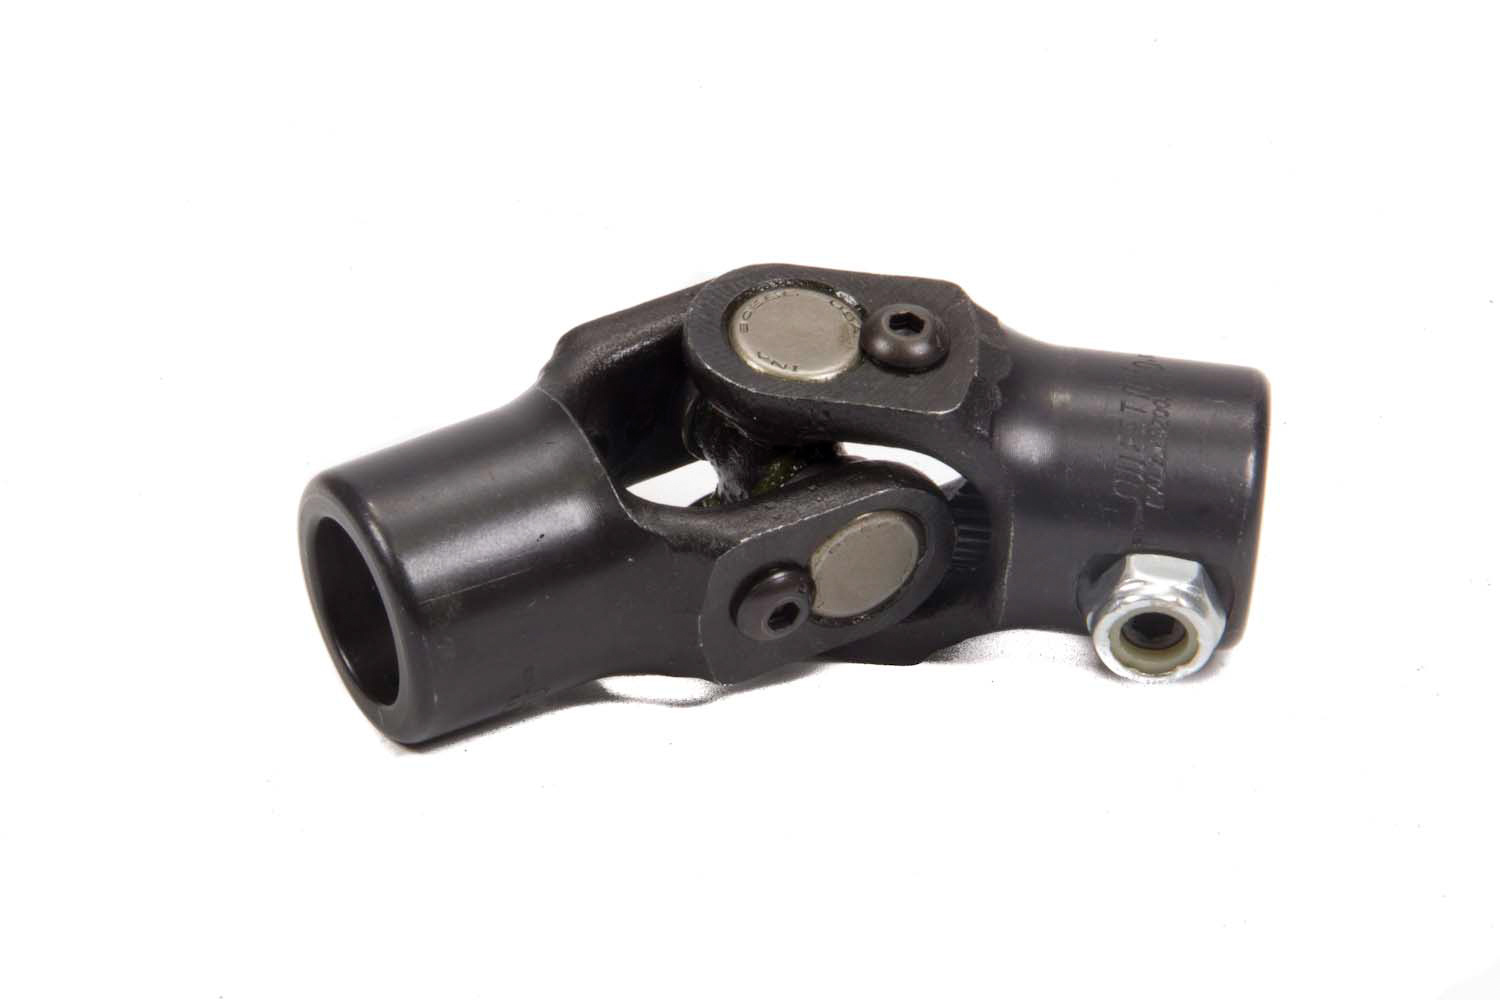 Sweet Manufacturing 401-50624 Steering Universal Joint, Single Joint, 3/4 in Smooth Bore to 3D Jeep Flats, Steel, Black Paint, Each